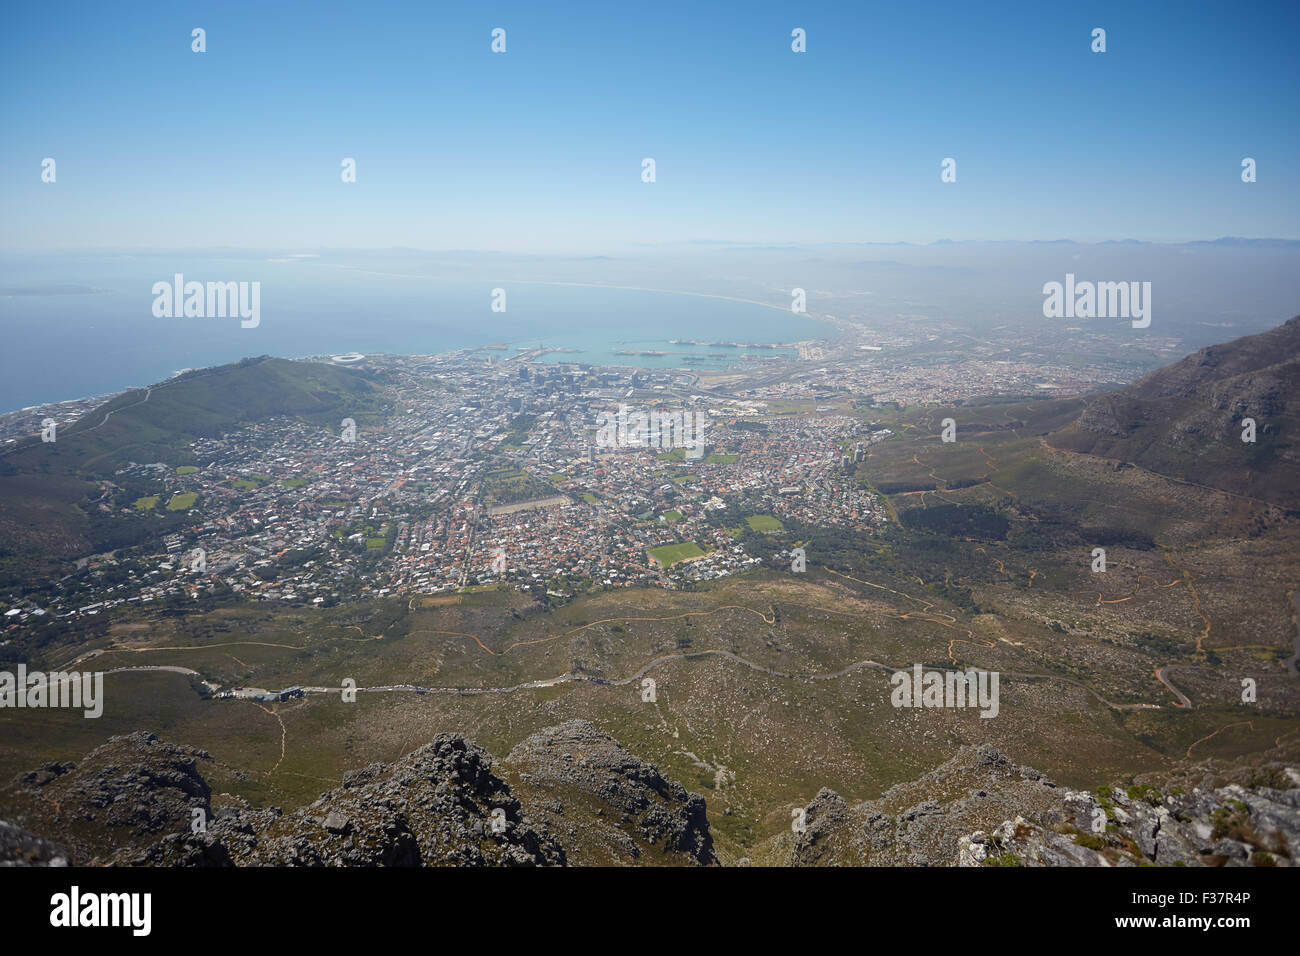 beautiful mountain landscape in South Africa from a height Stock Photo